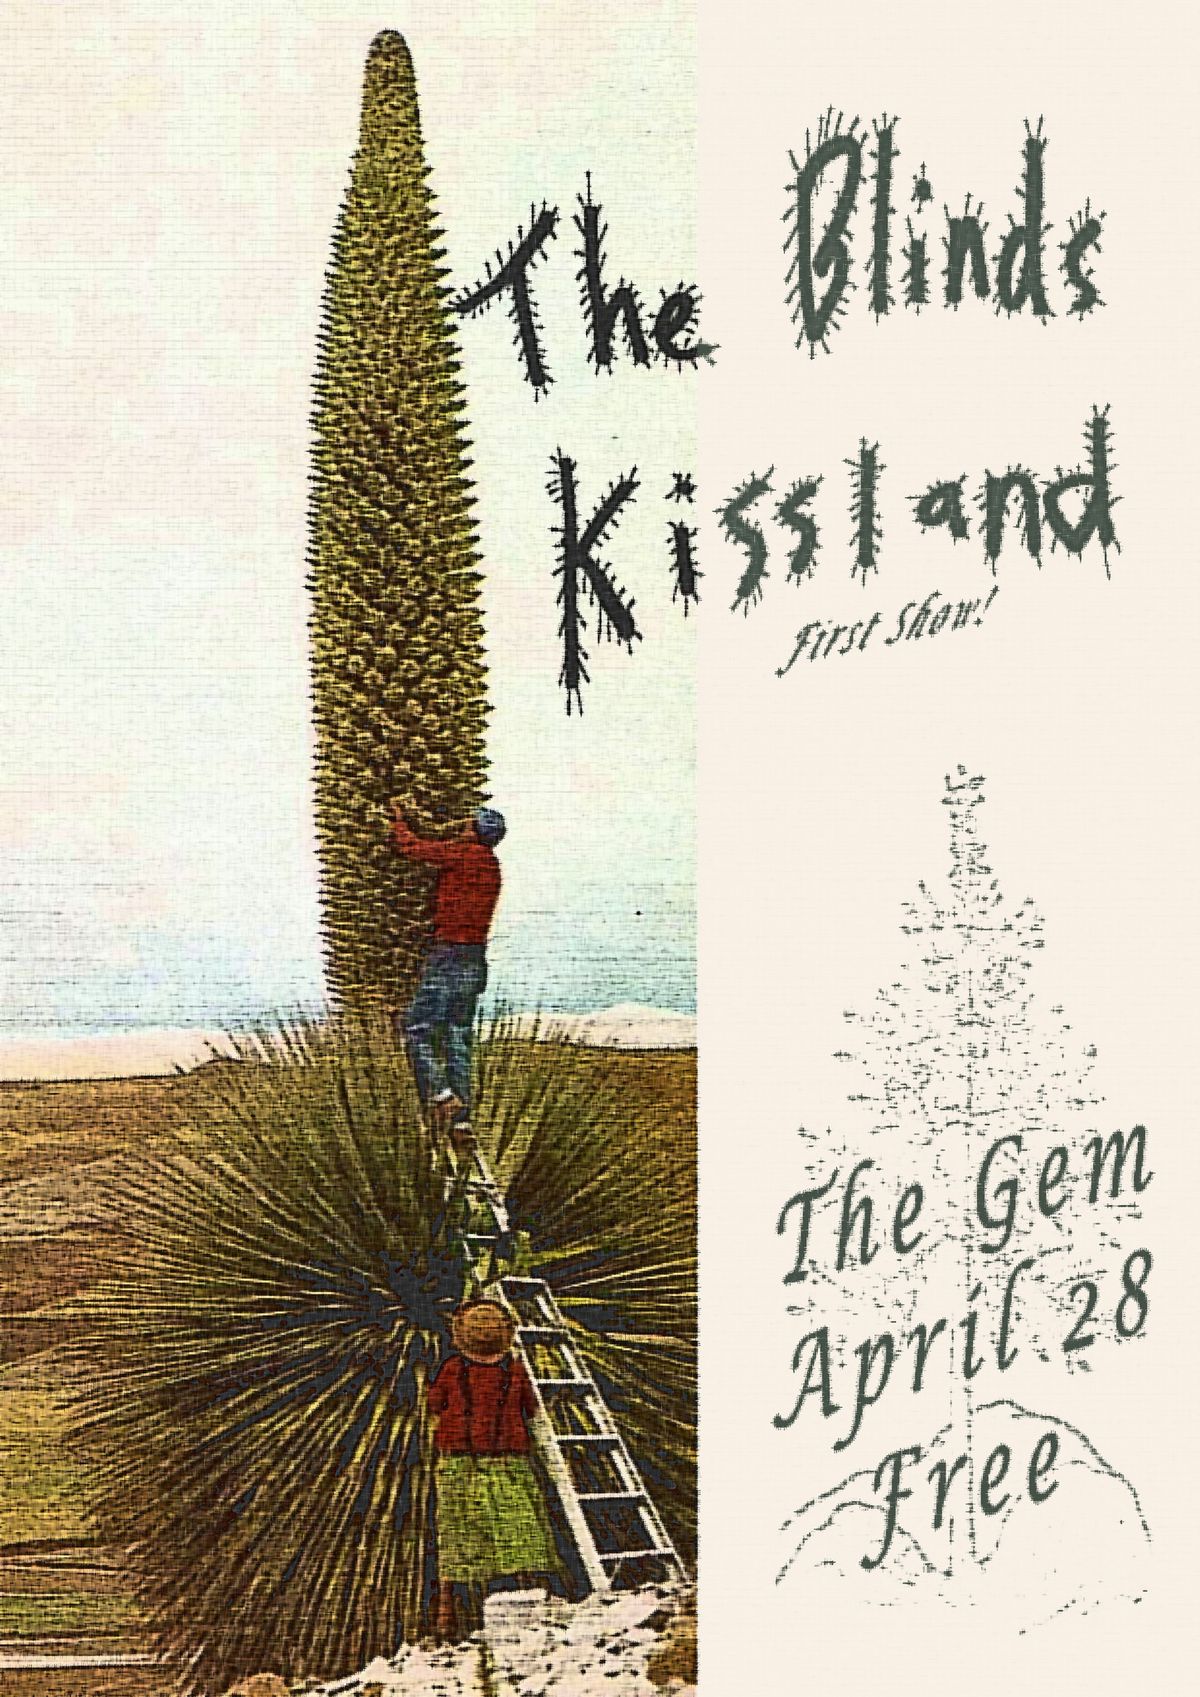 The Blinds + KISSLAND (first show) @ The Gem